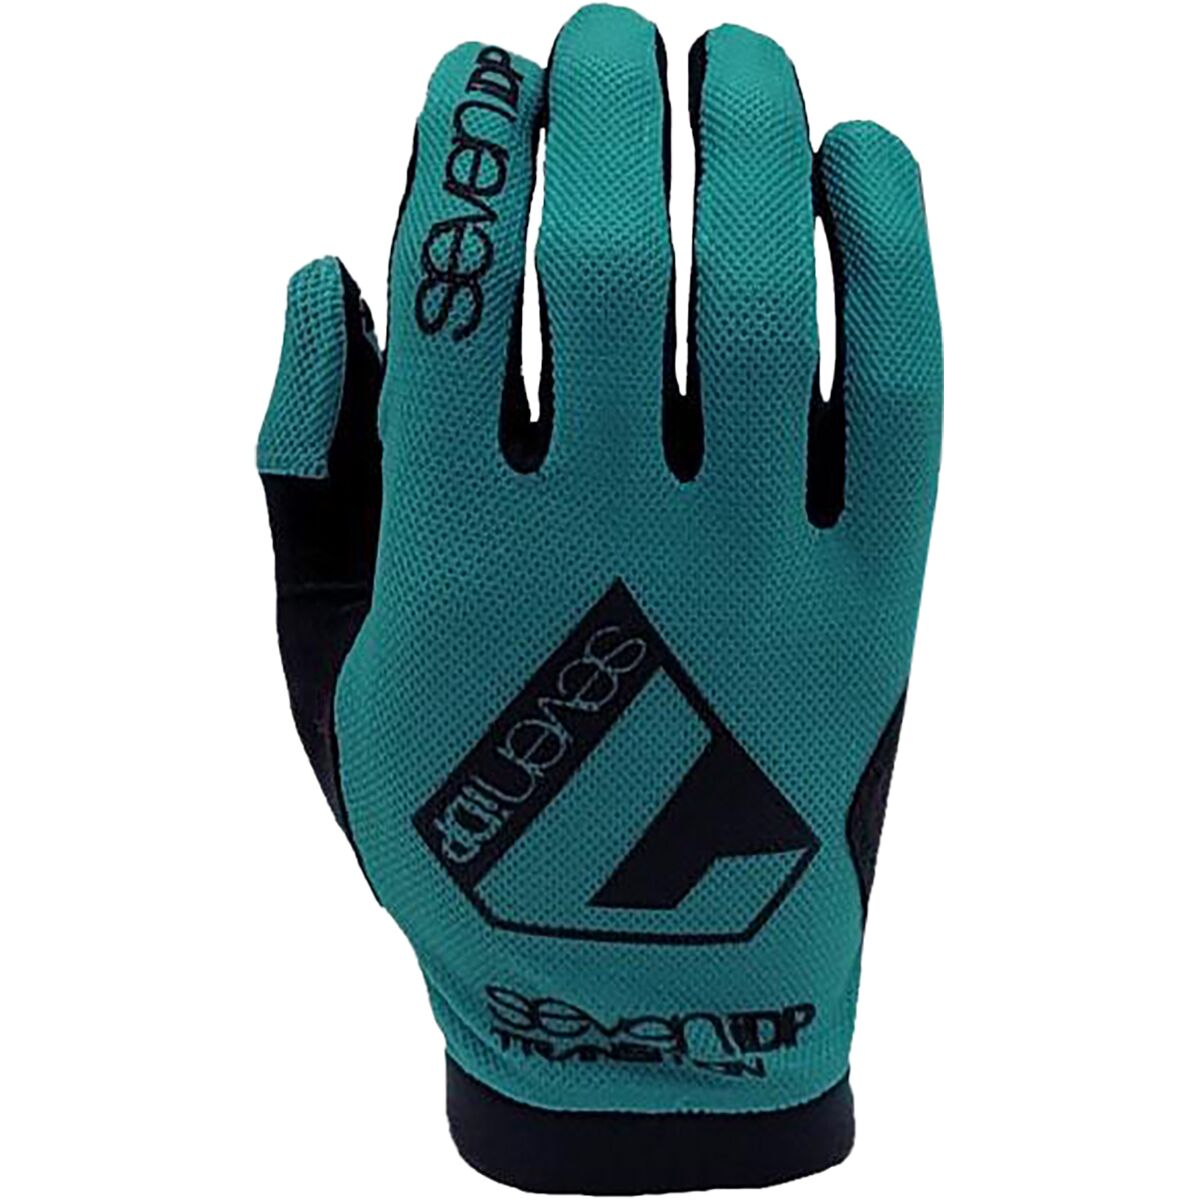 7 Protection Transition Glove - Men's